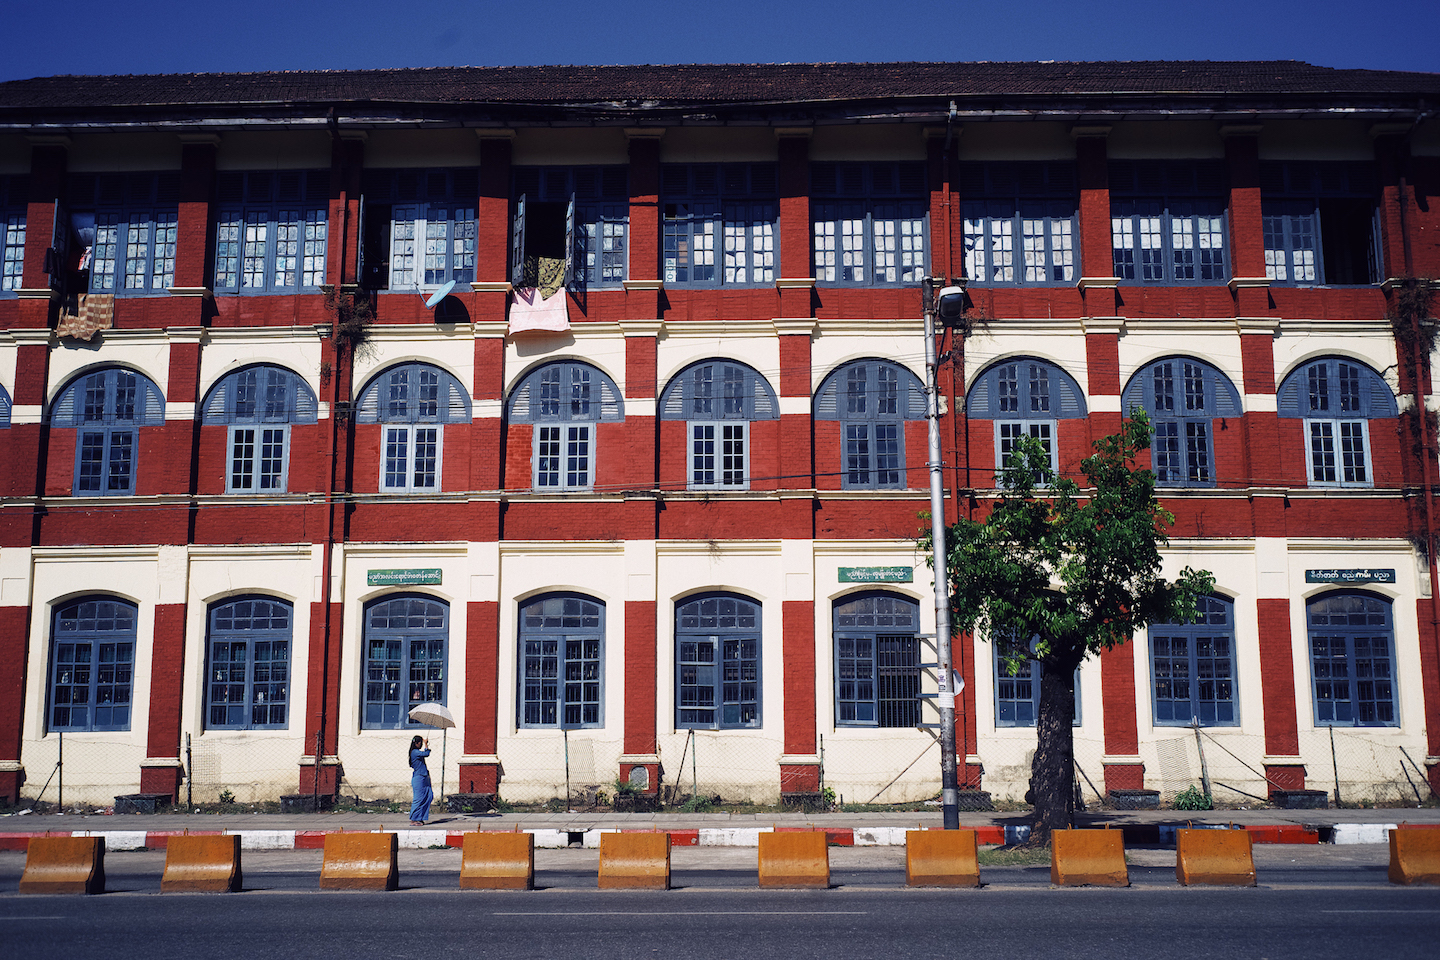 Remnants of old British colonial architecture can be found throughout the city, mostly dating back from the 19th century.